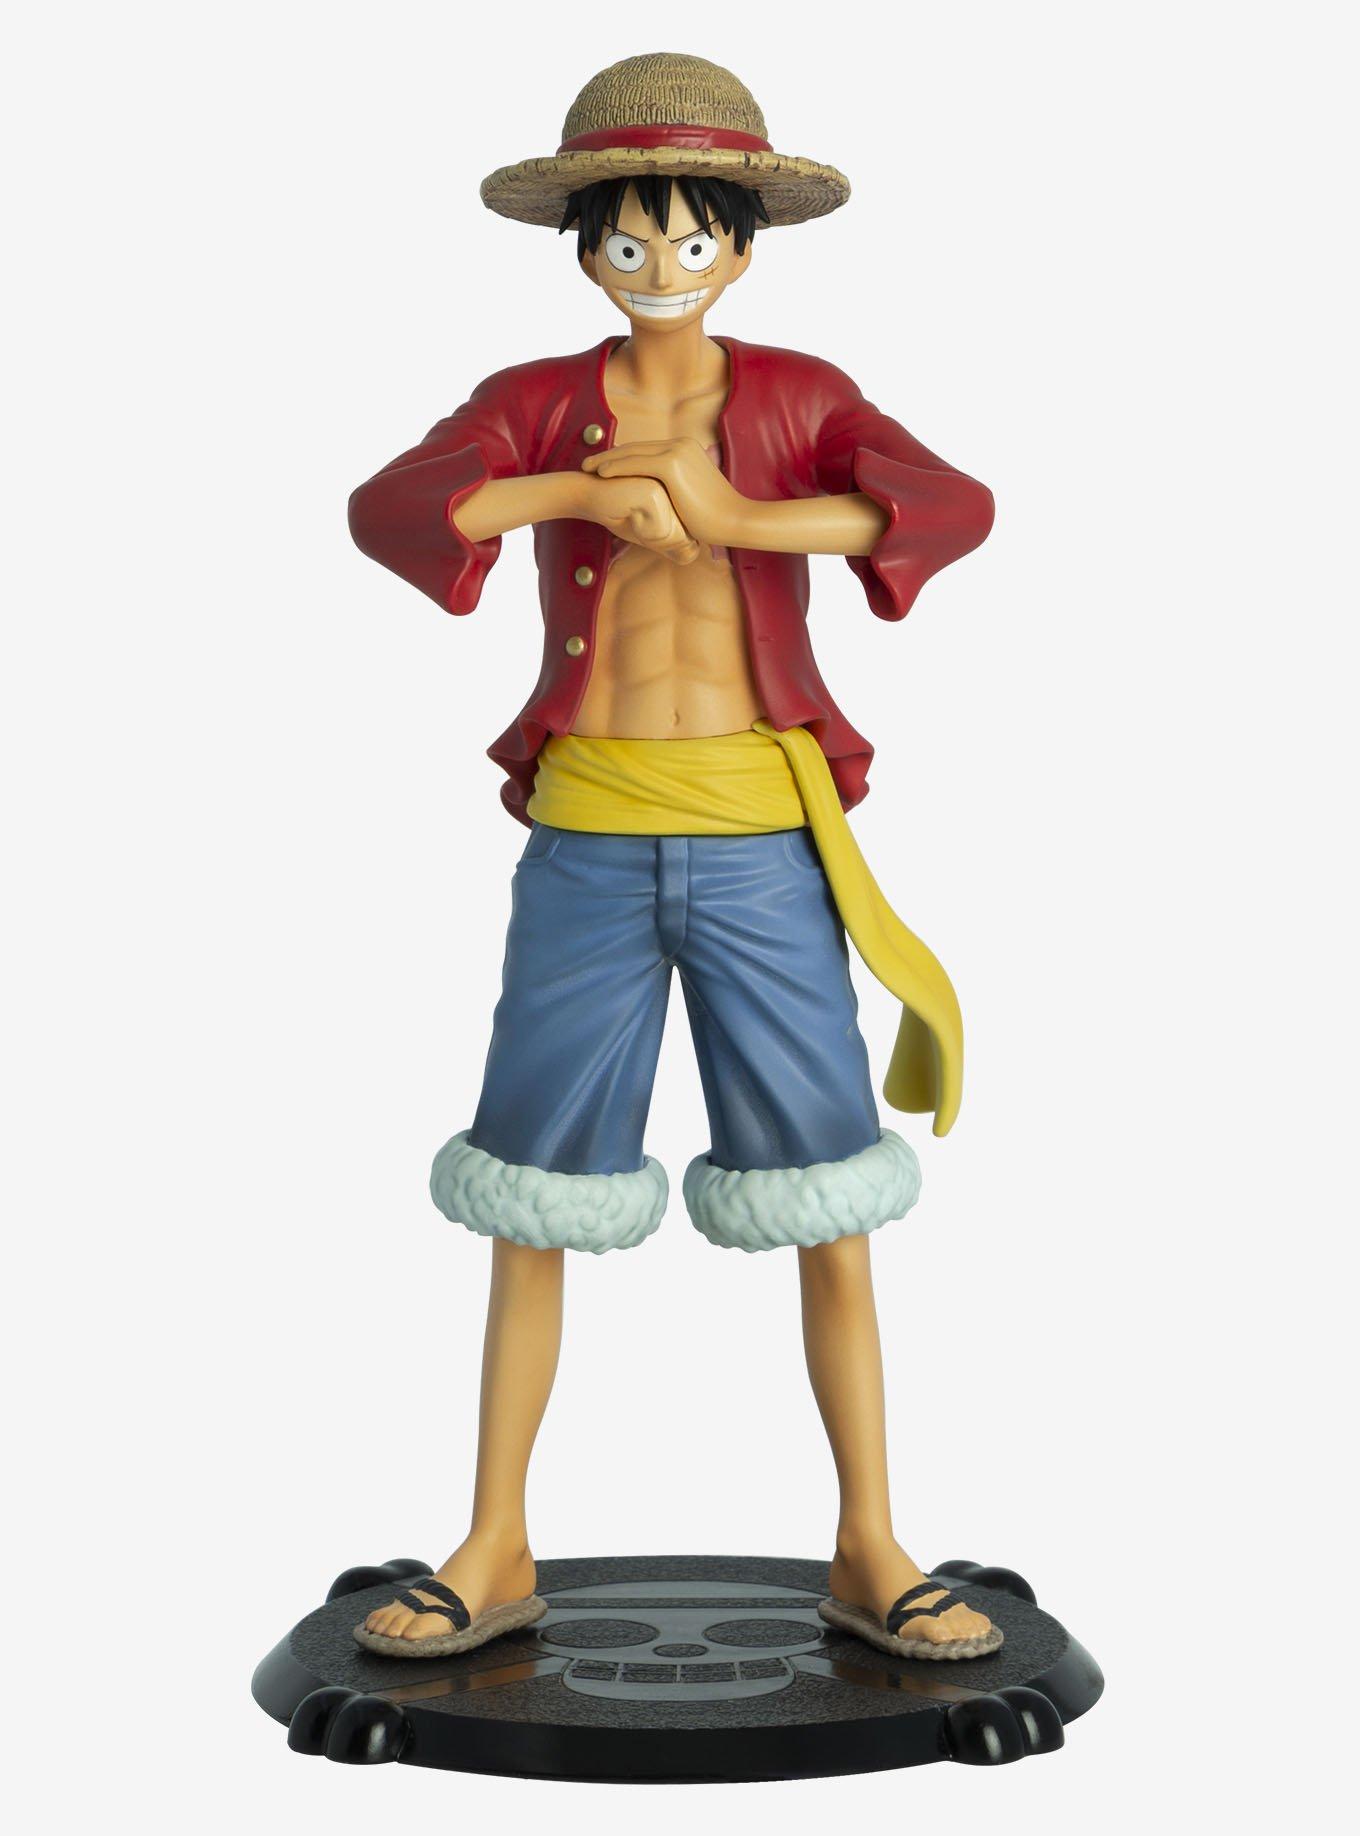 Finally found a luffy figure! : r/ActionFigures